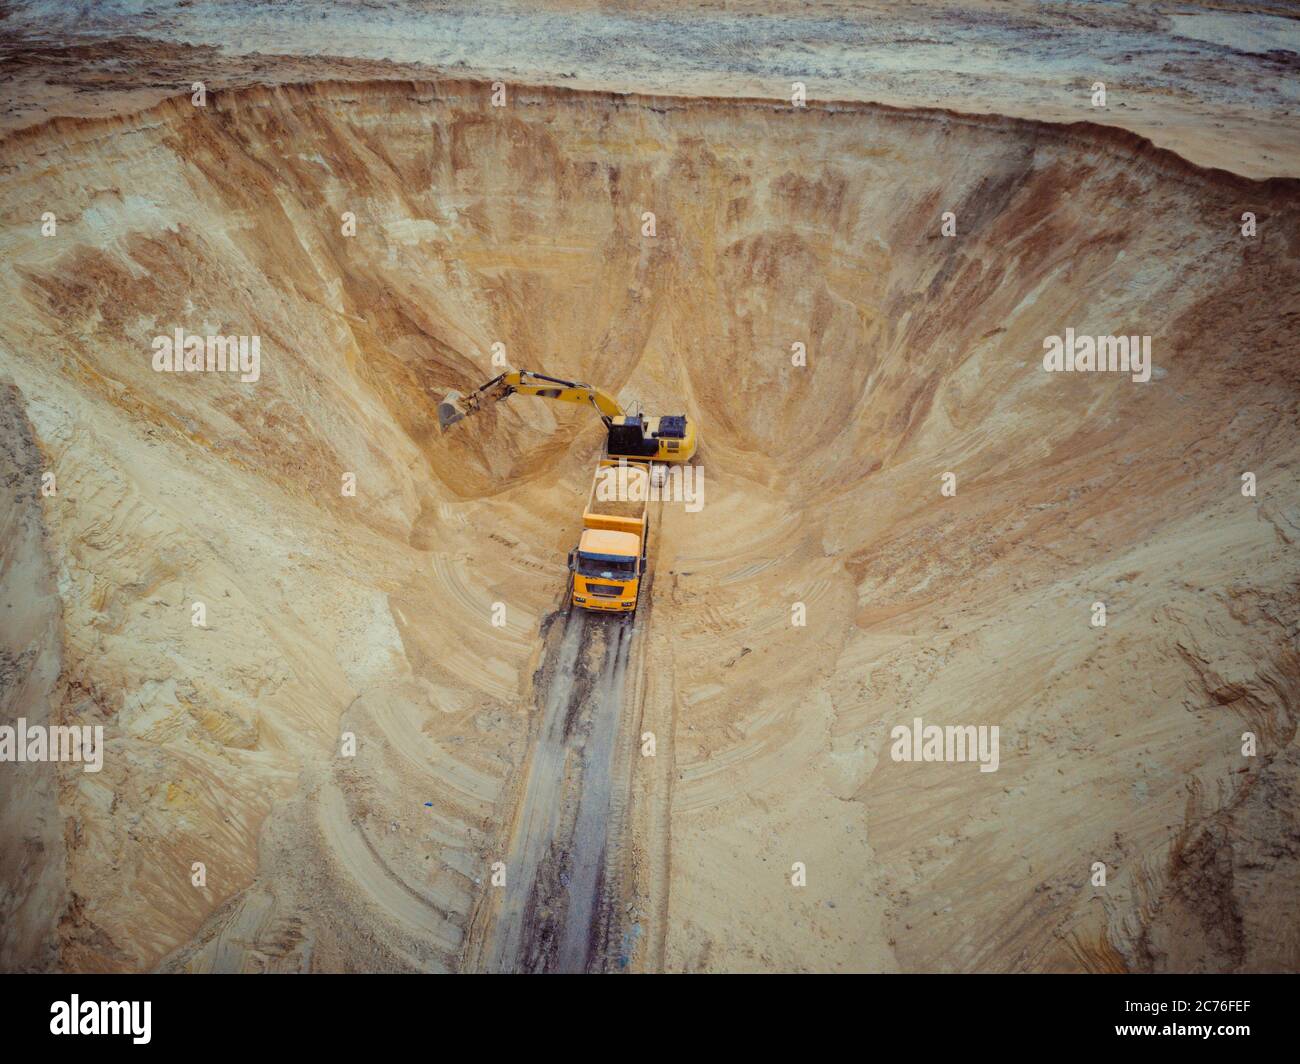 Excavator and dumper truck. Aerial view of loading sand into a truck. A heavy machinery - excavator and truck are working in the sand quarry. Stock Photo